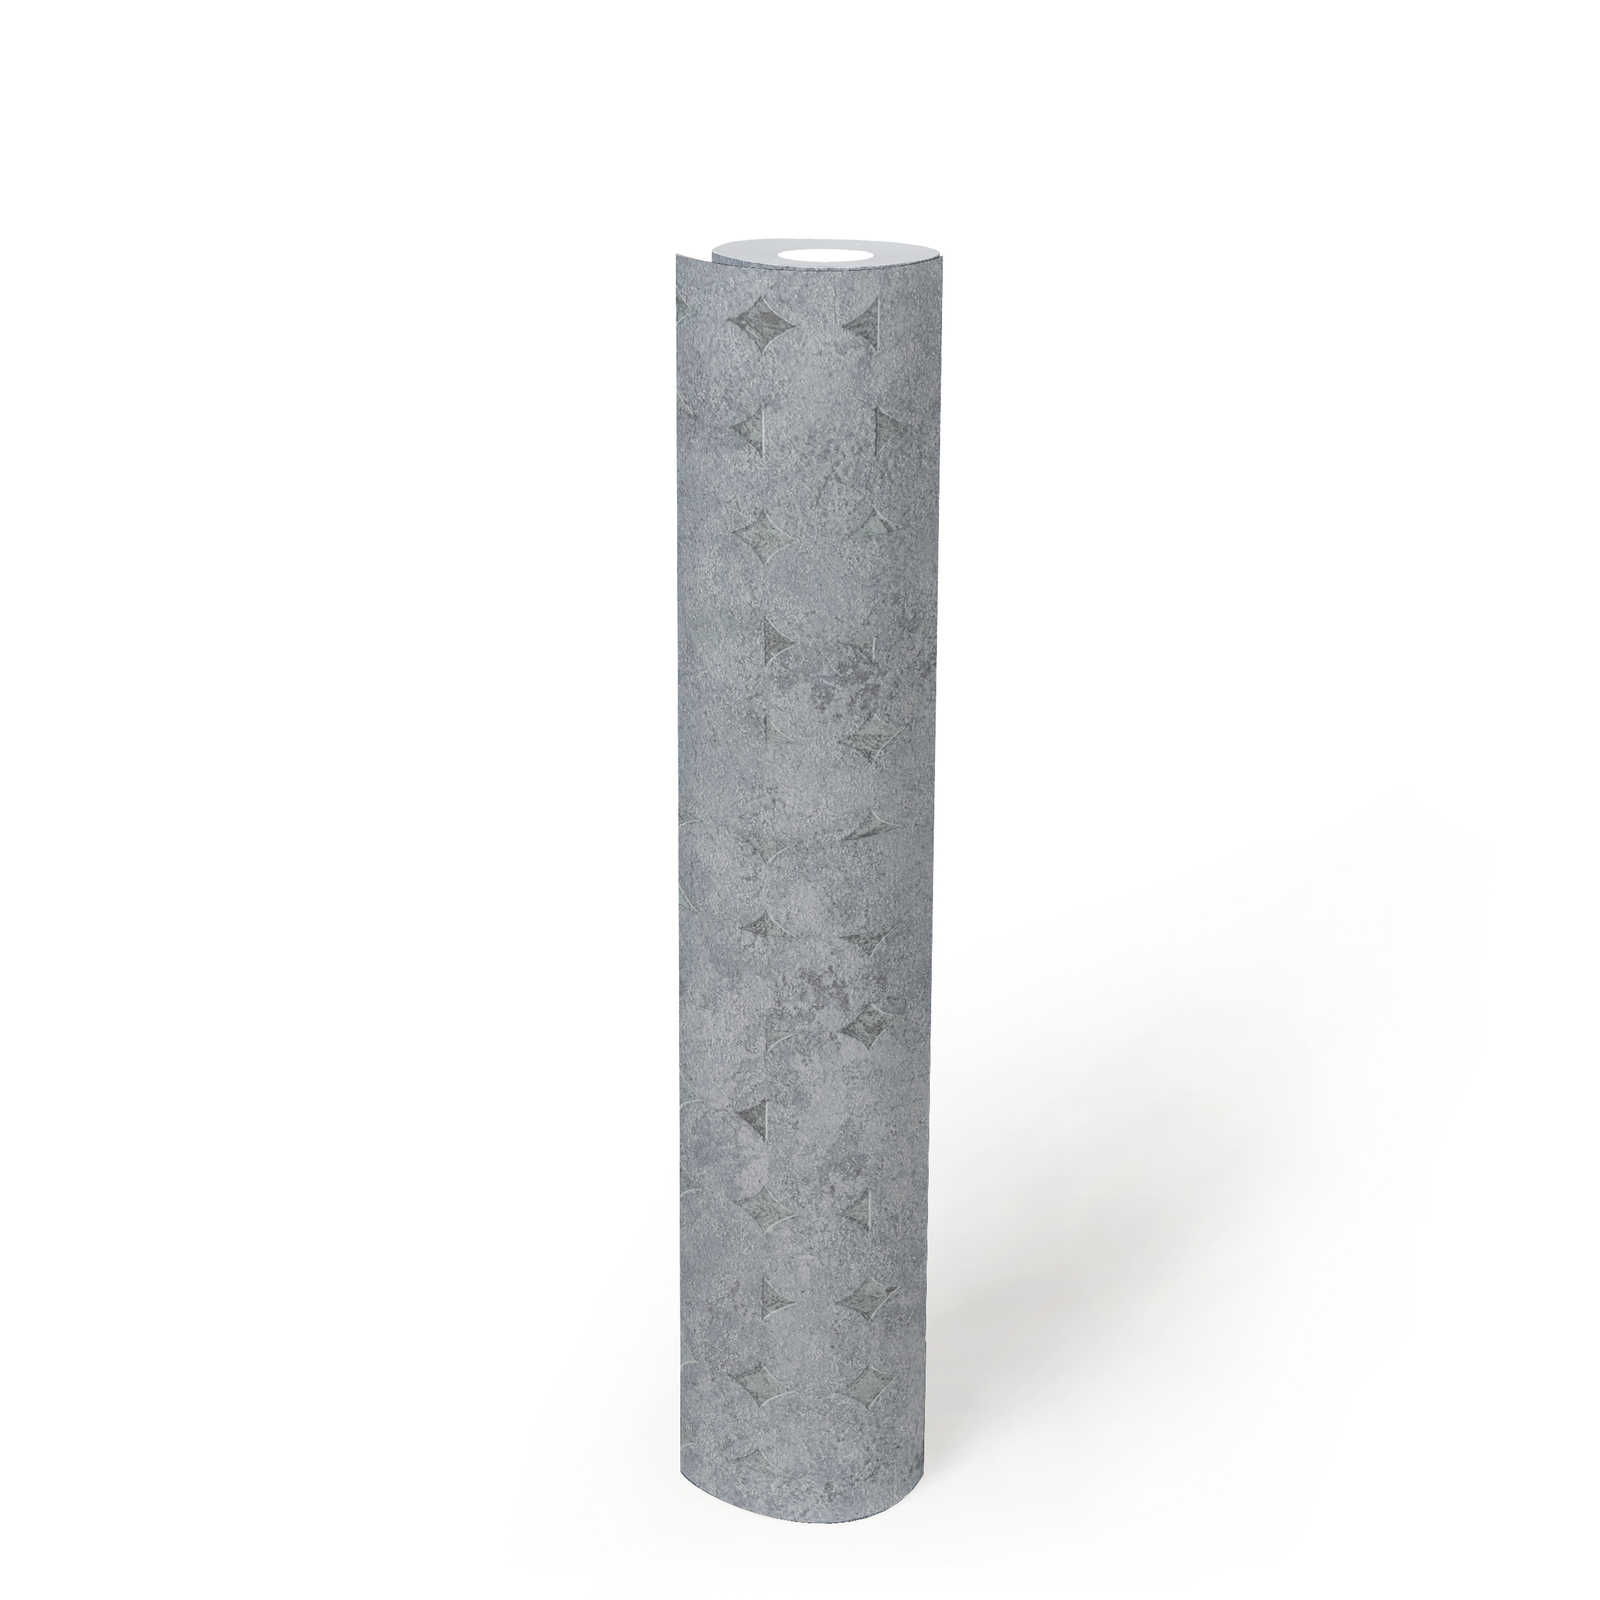             Non-woven wallpaper in one colour with structure and rough pattern - grey, silver
        